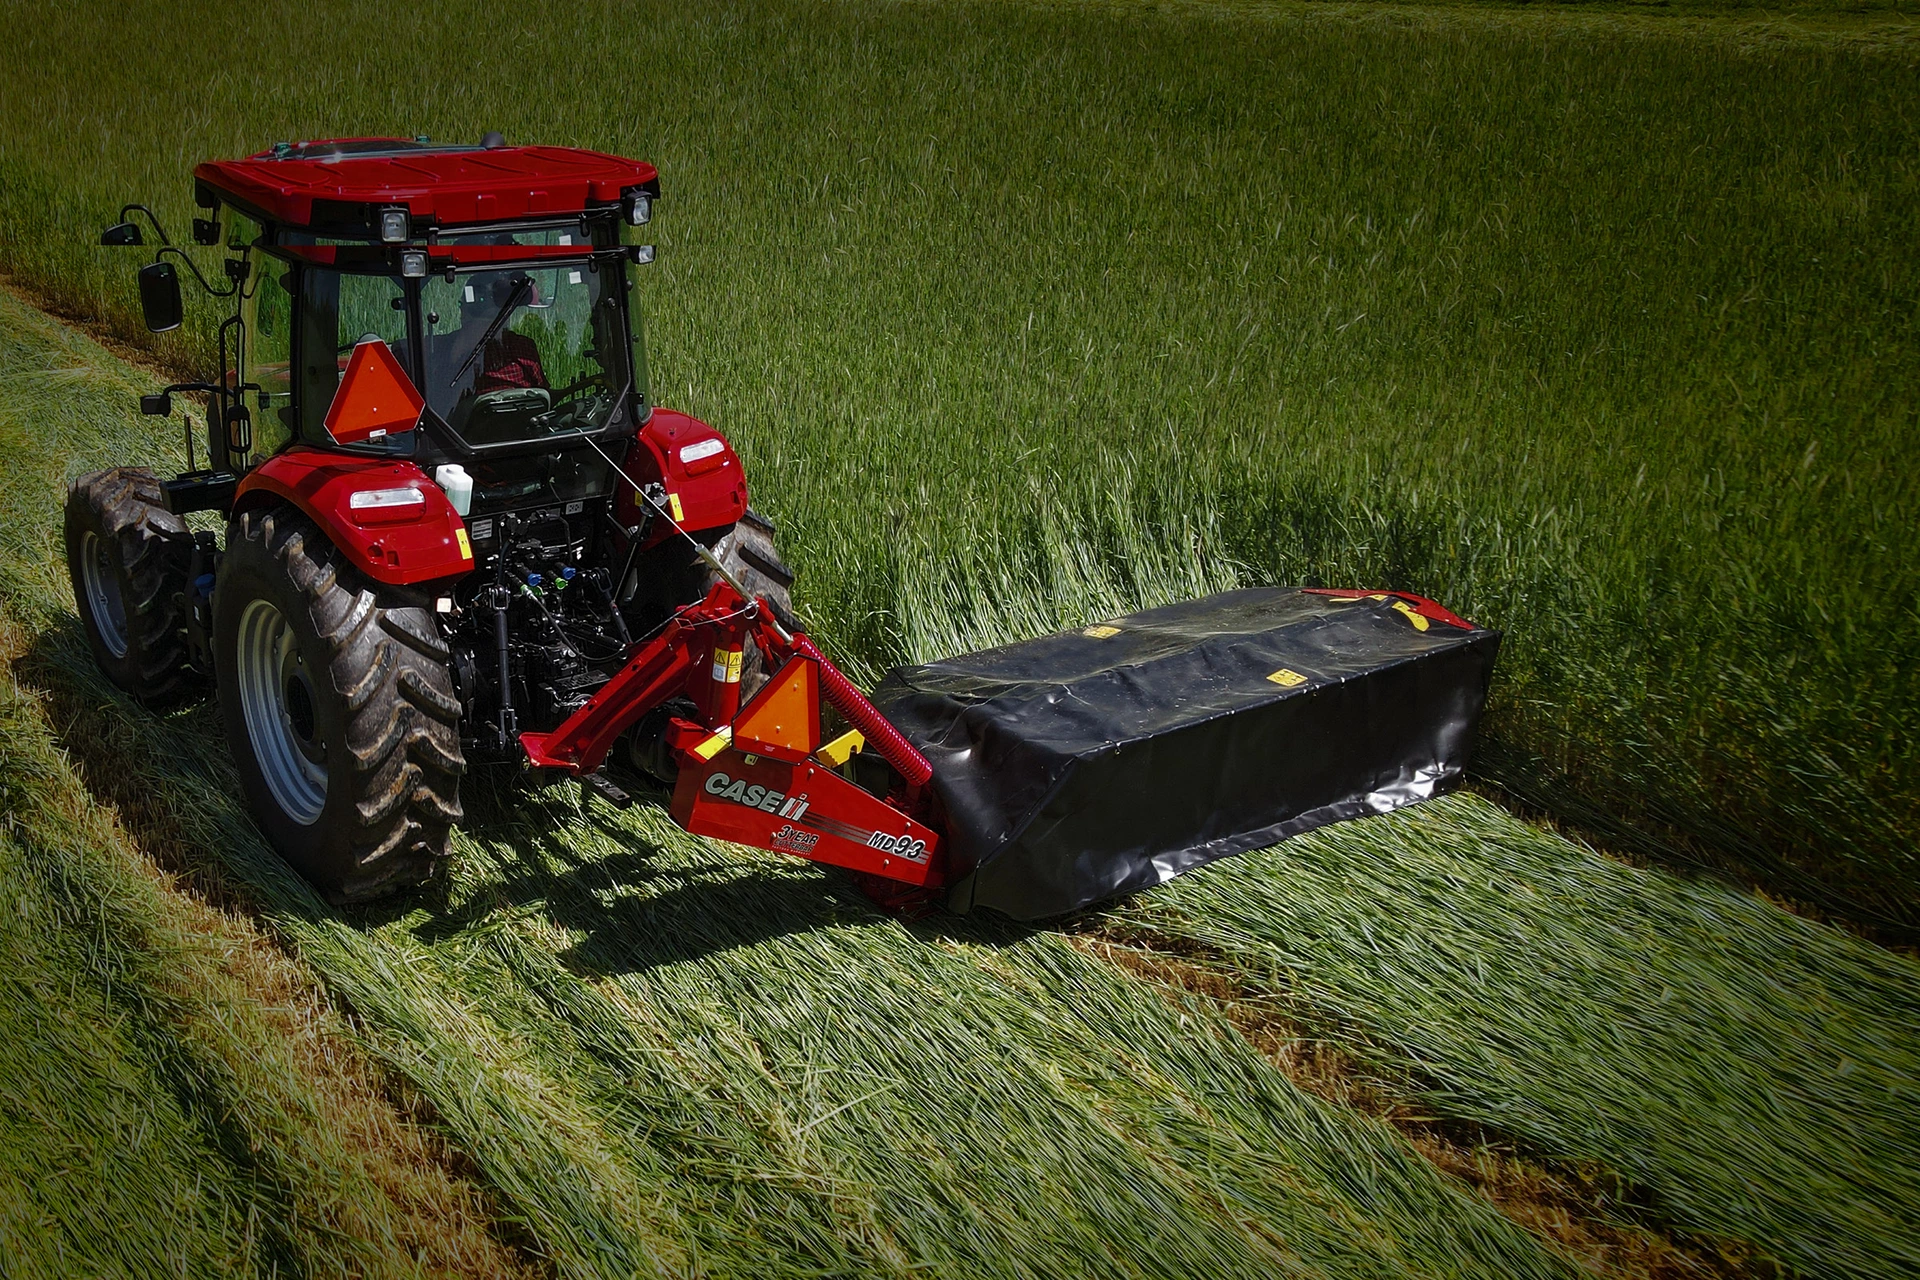 A Case IH tractor with MD93 disc mower